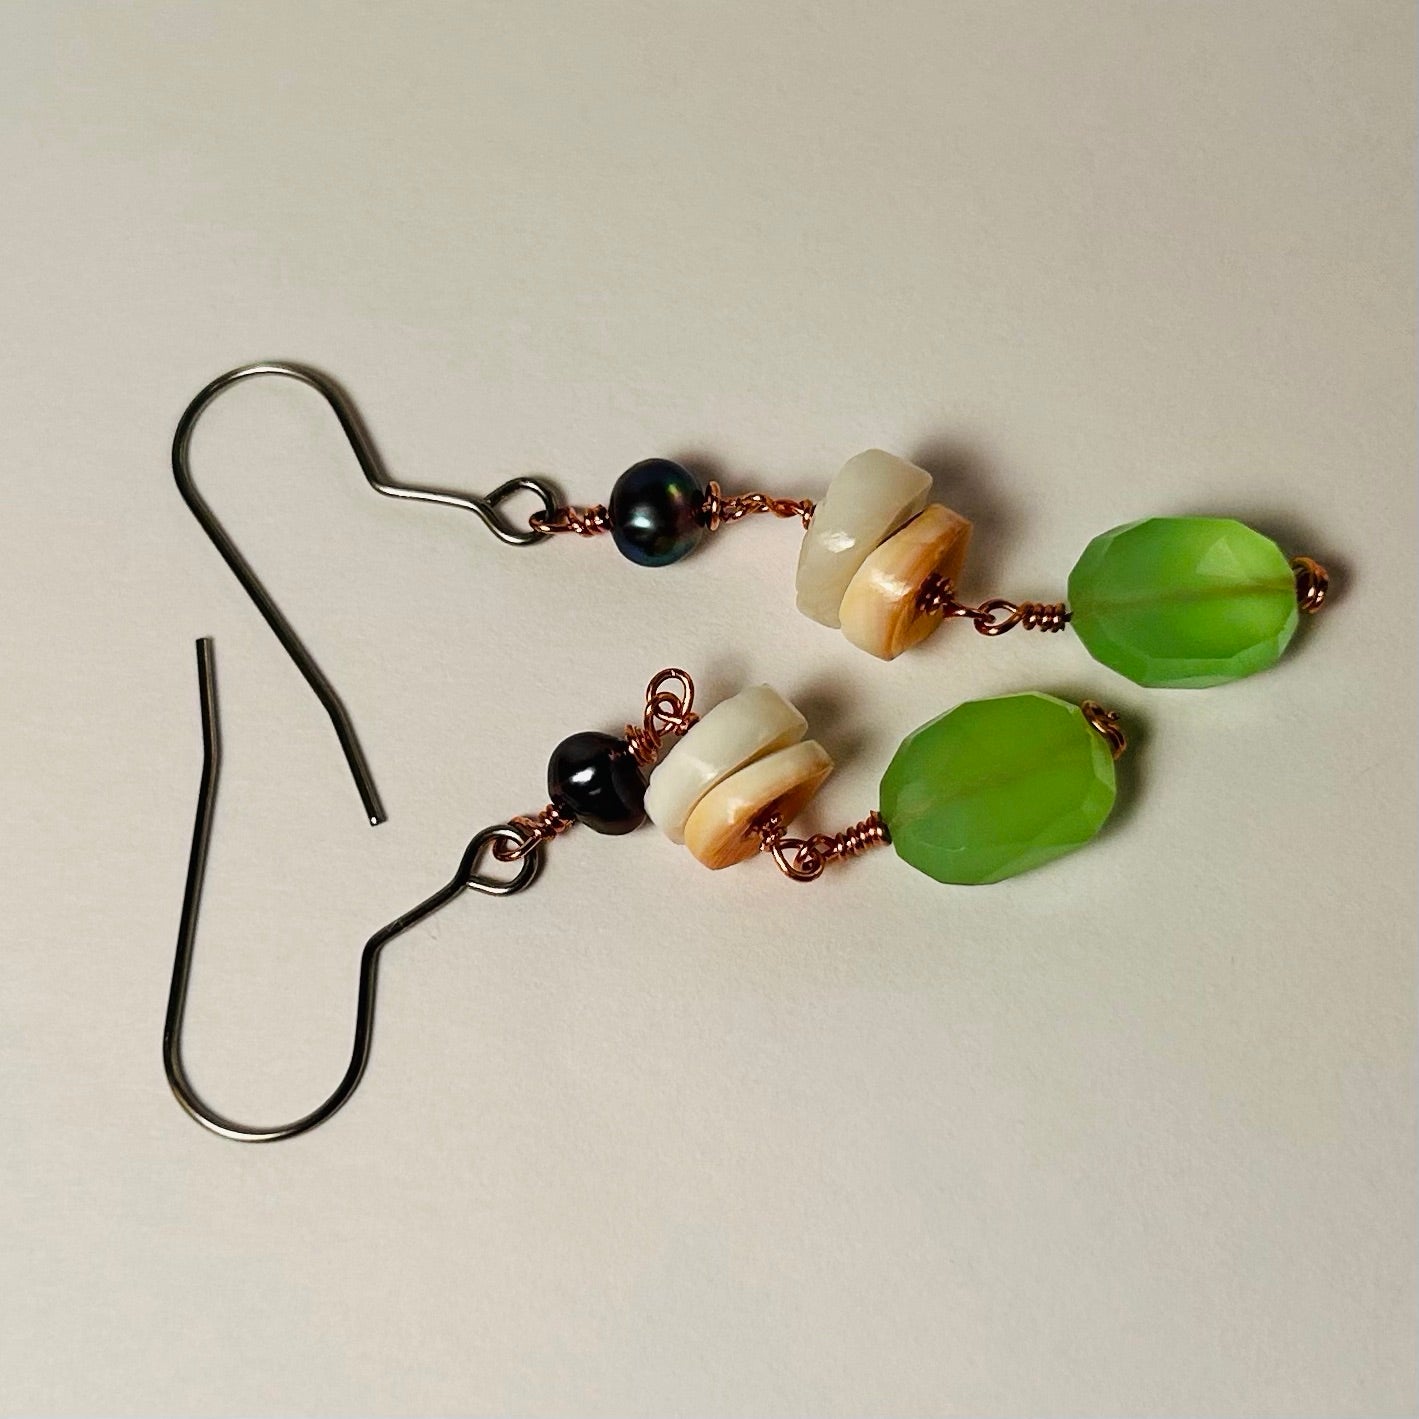 Apparition at The Lighthouse, Dangling Earrings